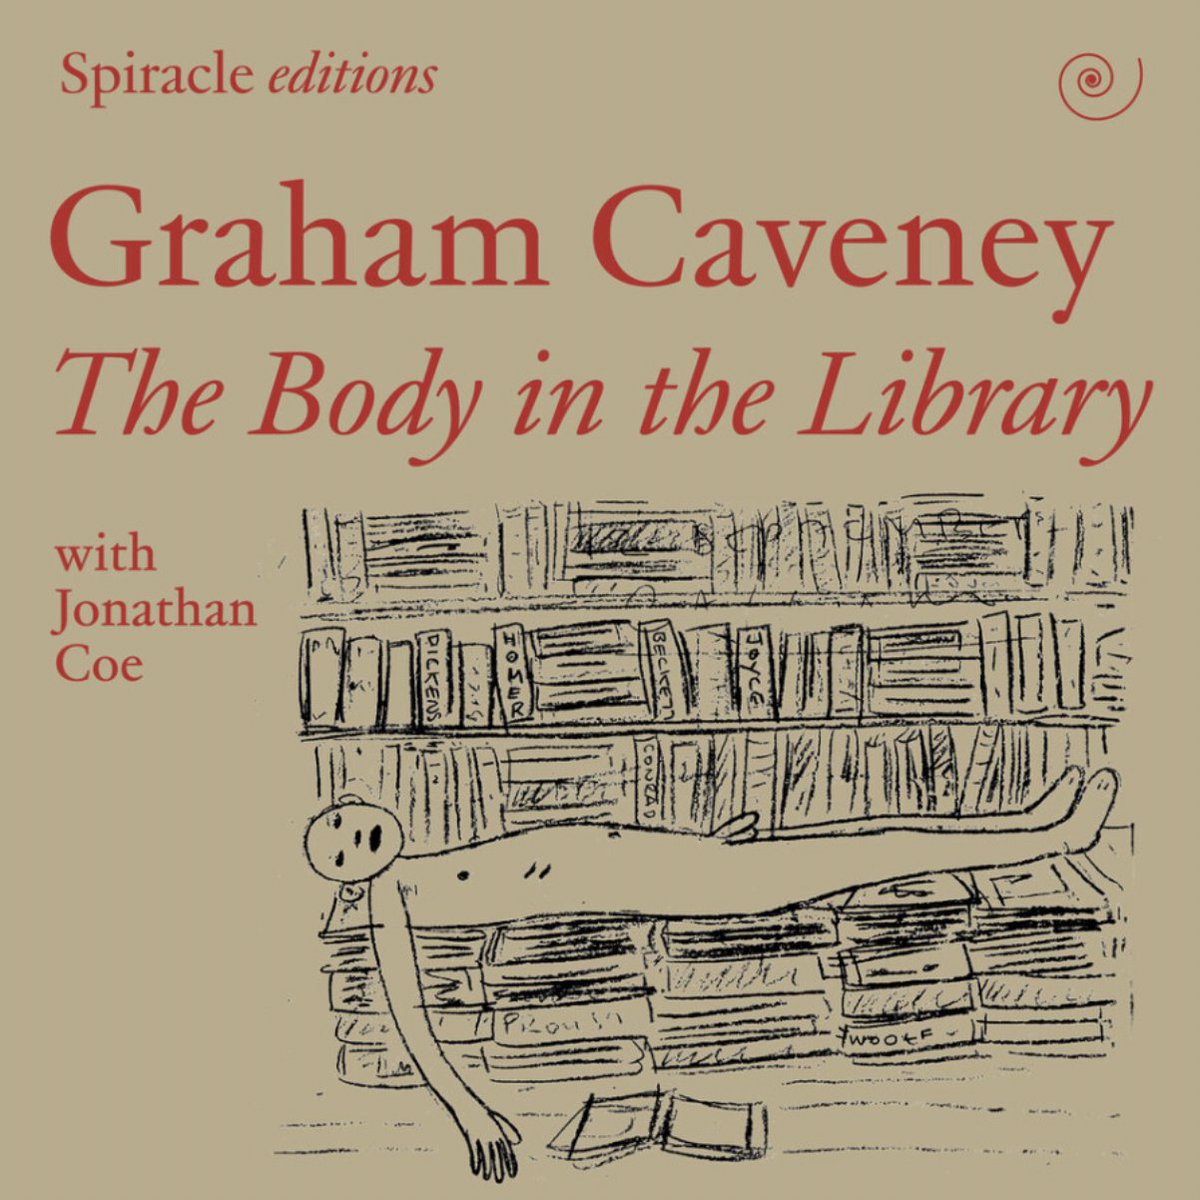 Coming tomorrow! The Body in the Library by Graham Caveney: spiracleaudiobooks.com/audiobooks/the… 'All I will say is that it is a small (in fact not so small) masterpiece. A book that will take hold of your heart and never let go.' @jonathancoe ★★★★★ The Independent #audiobooks